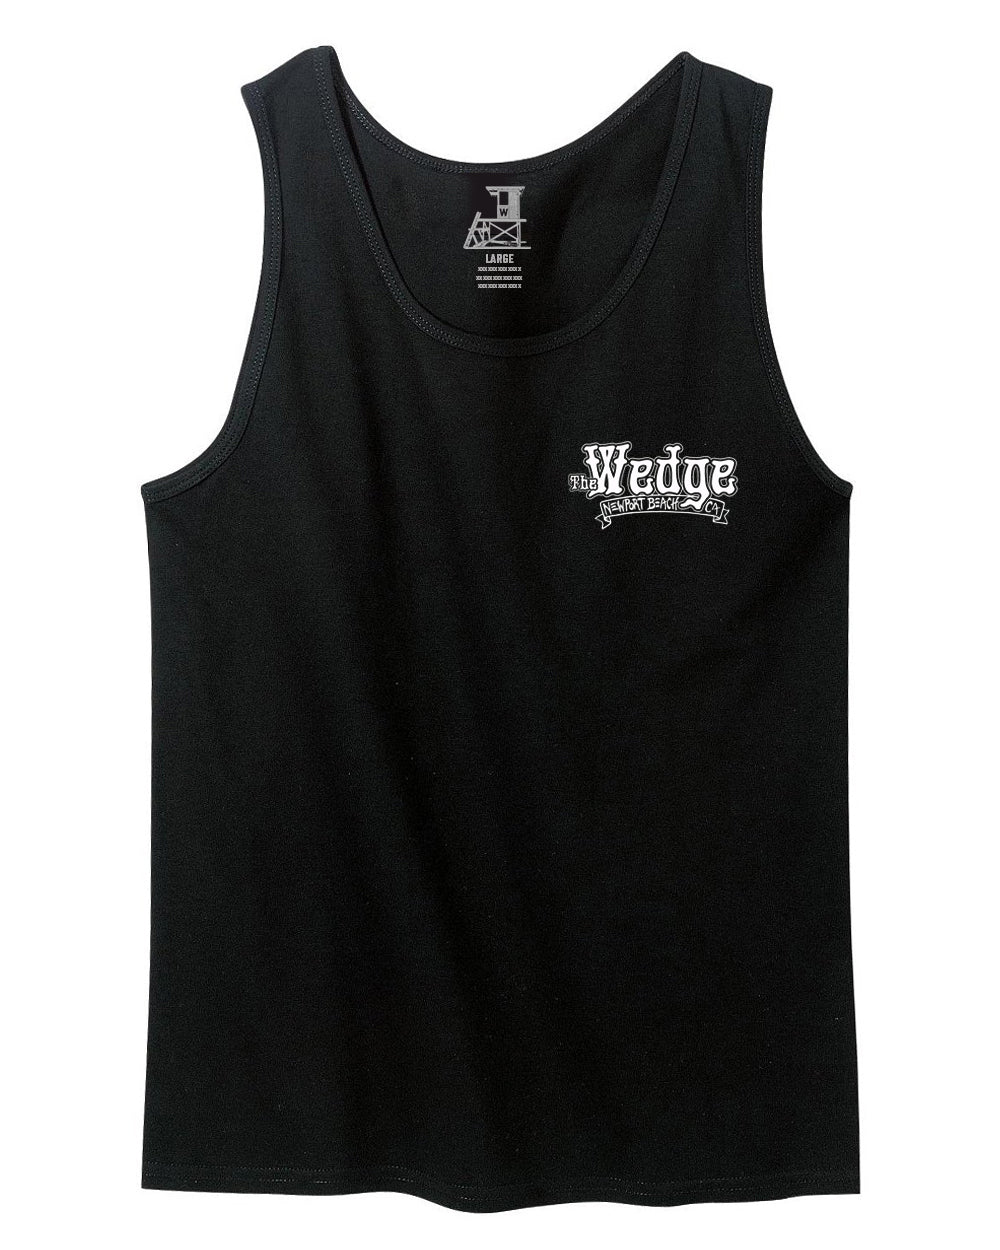 Wedge Griffin Tank Top - Black